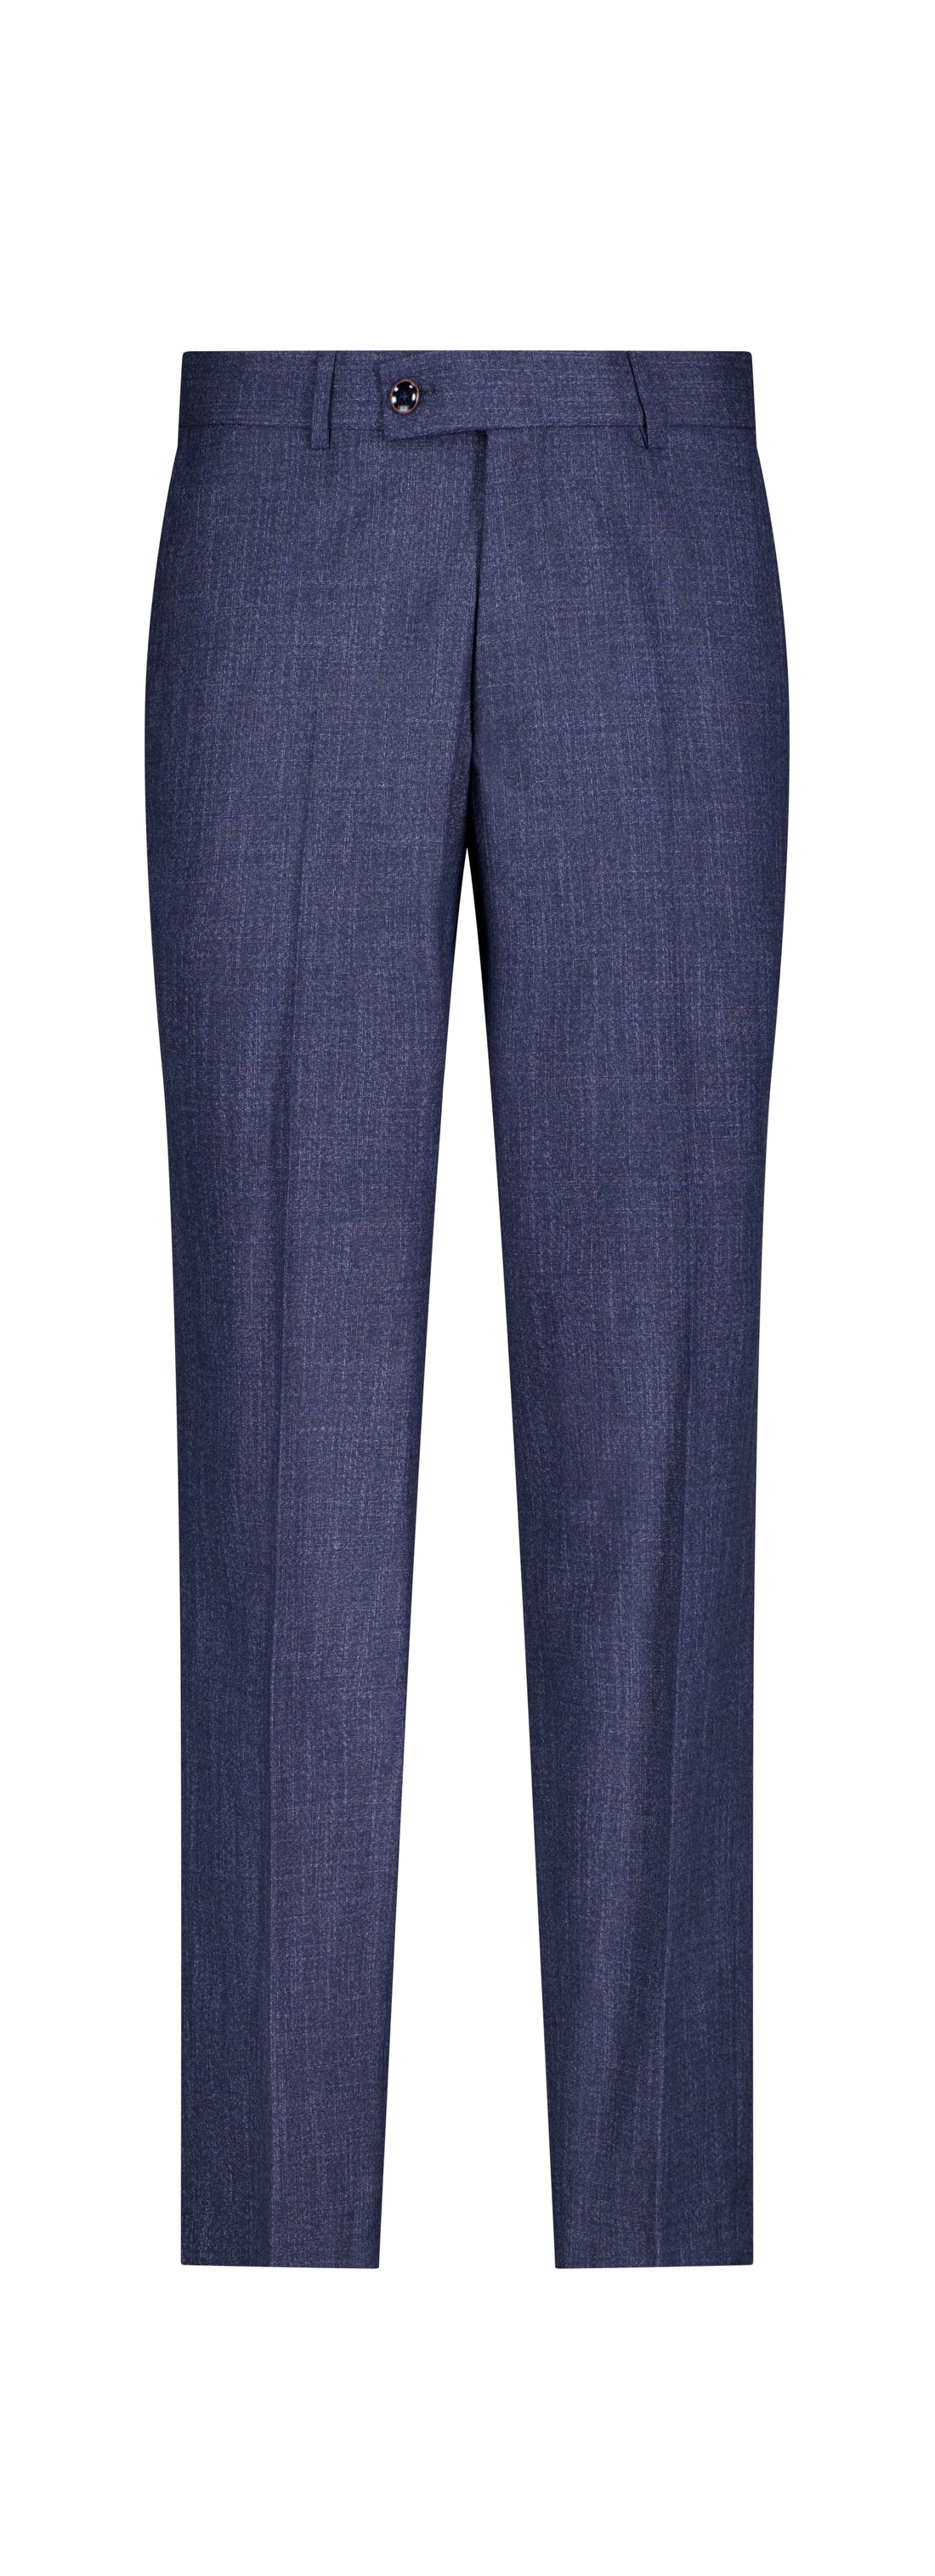 The Levinti Trousers -  by Urbbana